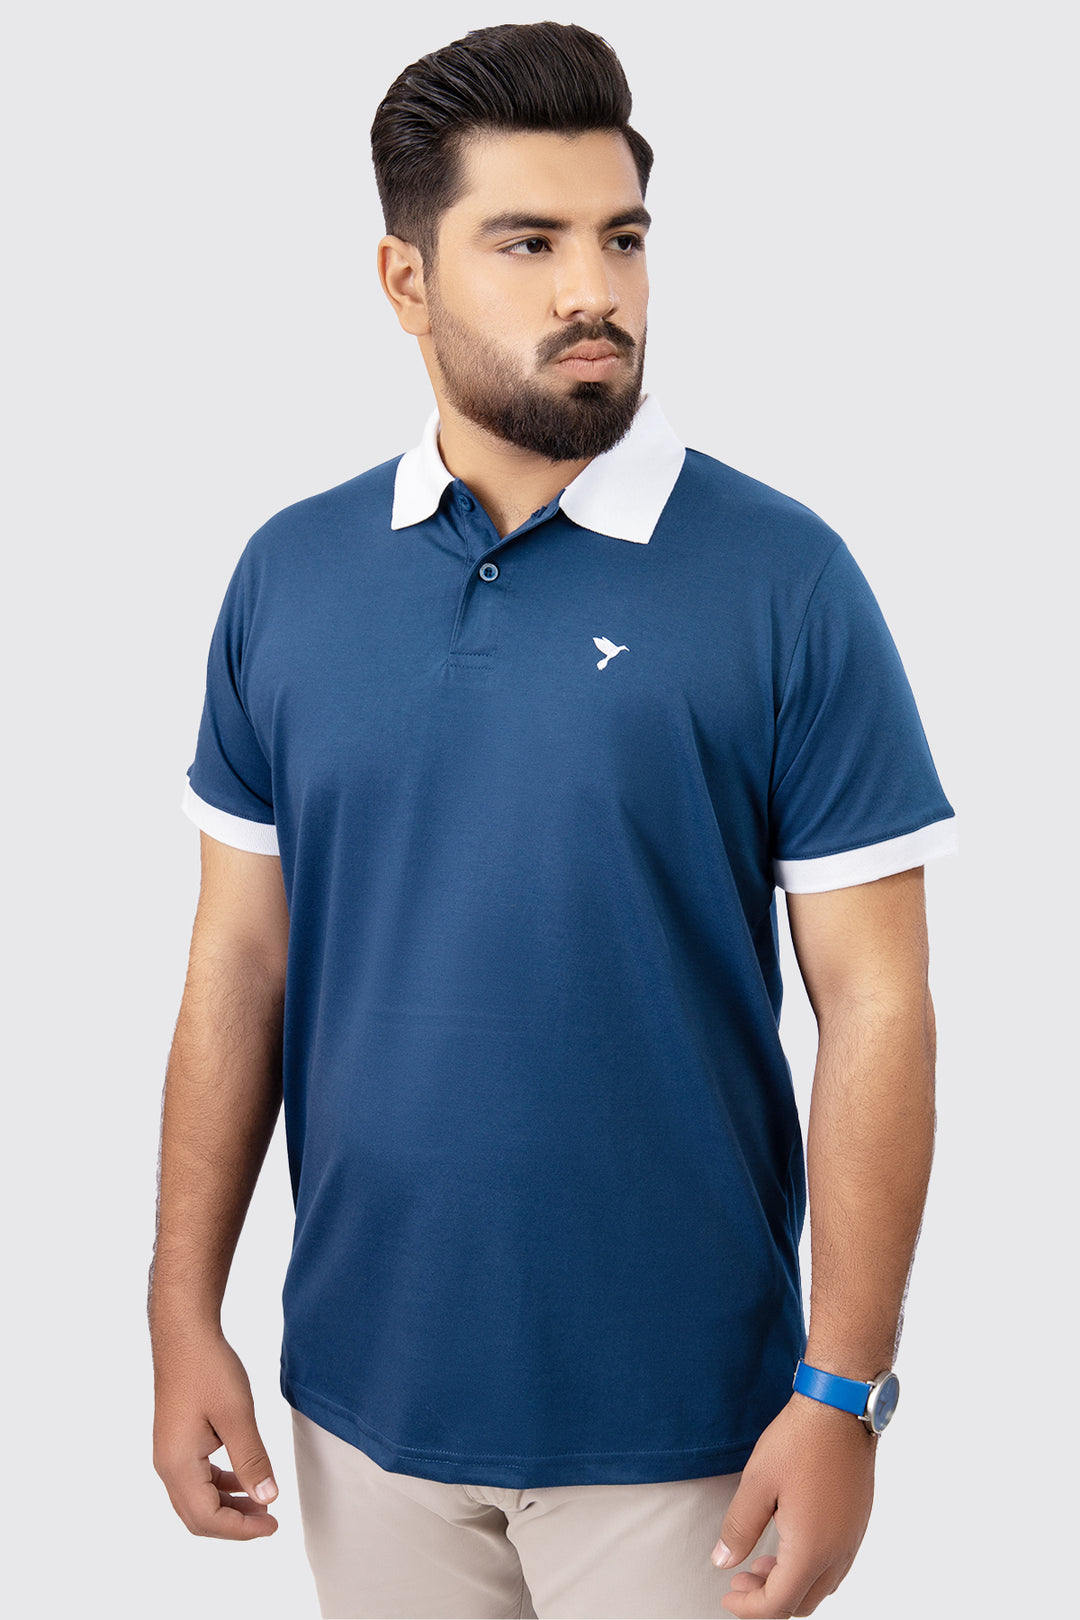 Blue Contrast Embroidered Polo Shirt (Plus Size) - A23 - MP0202P